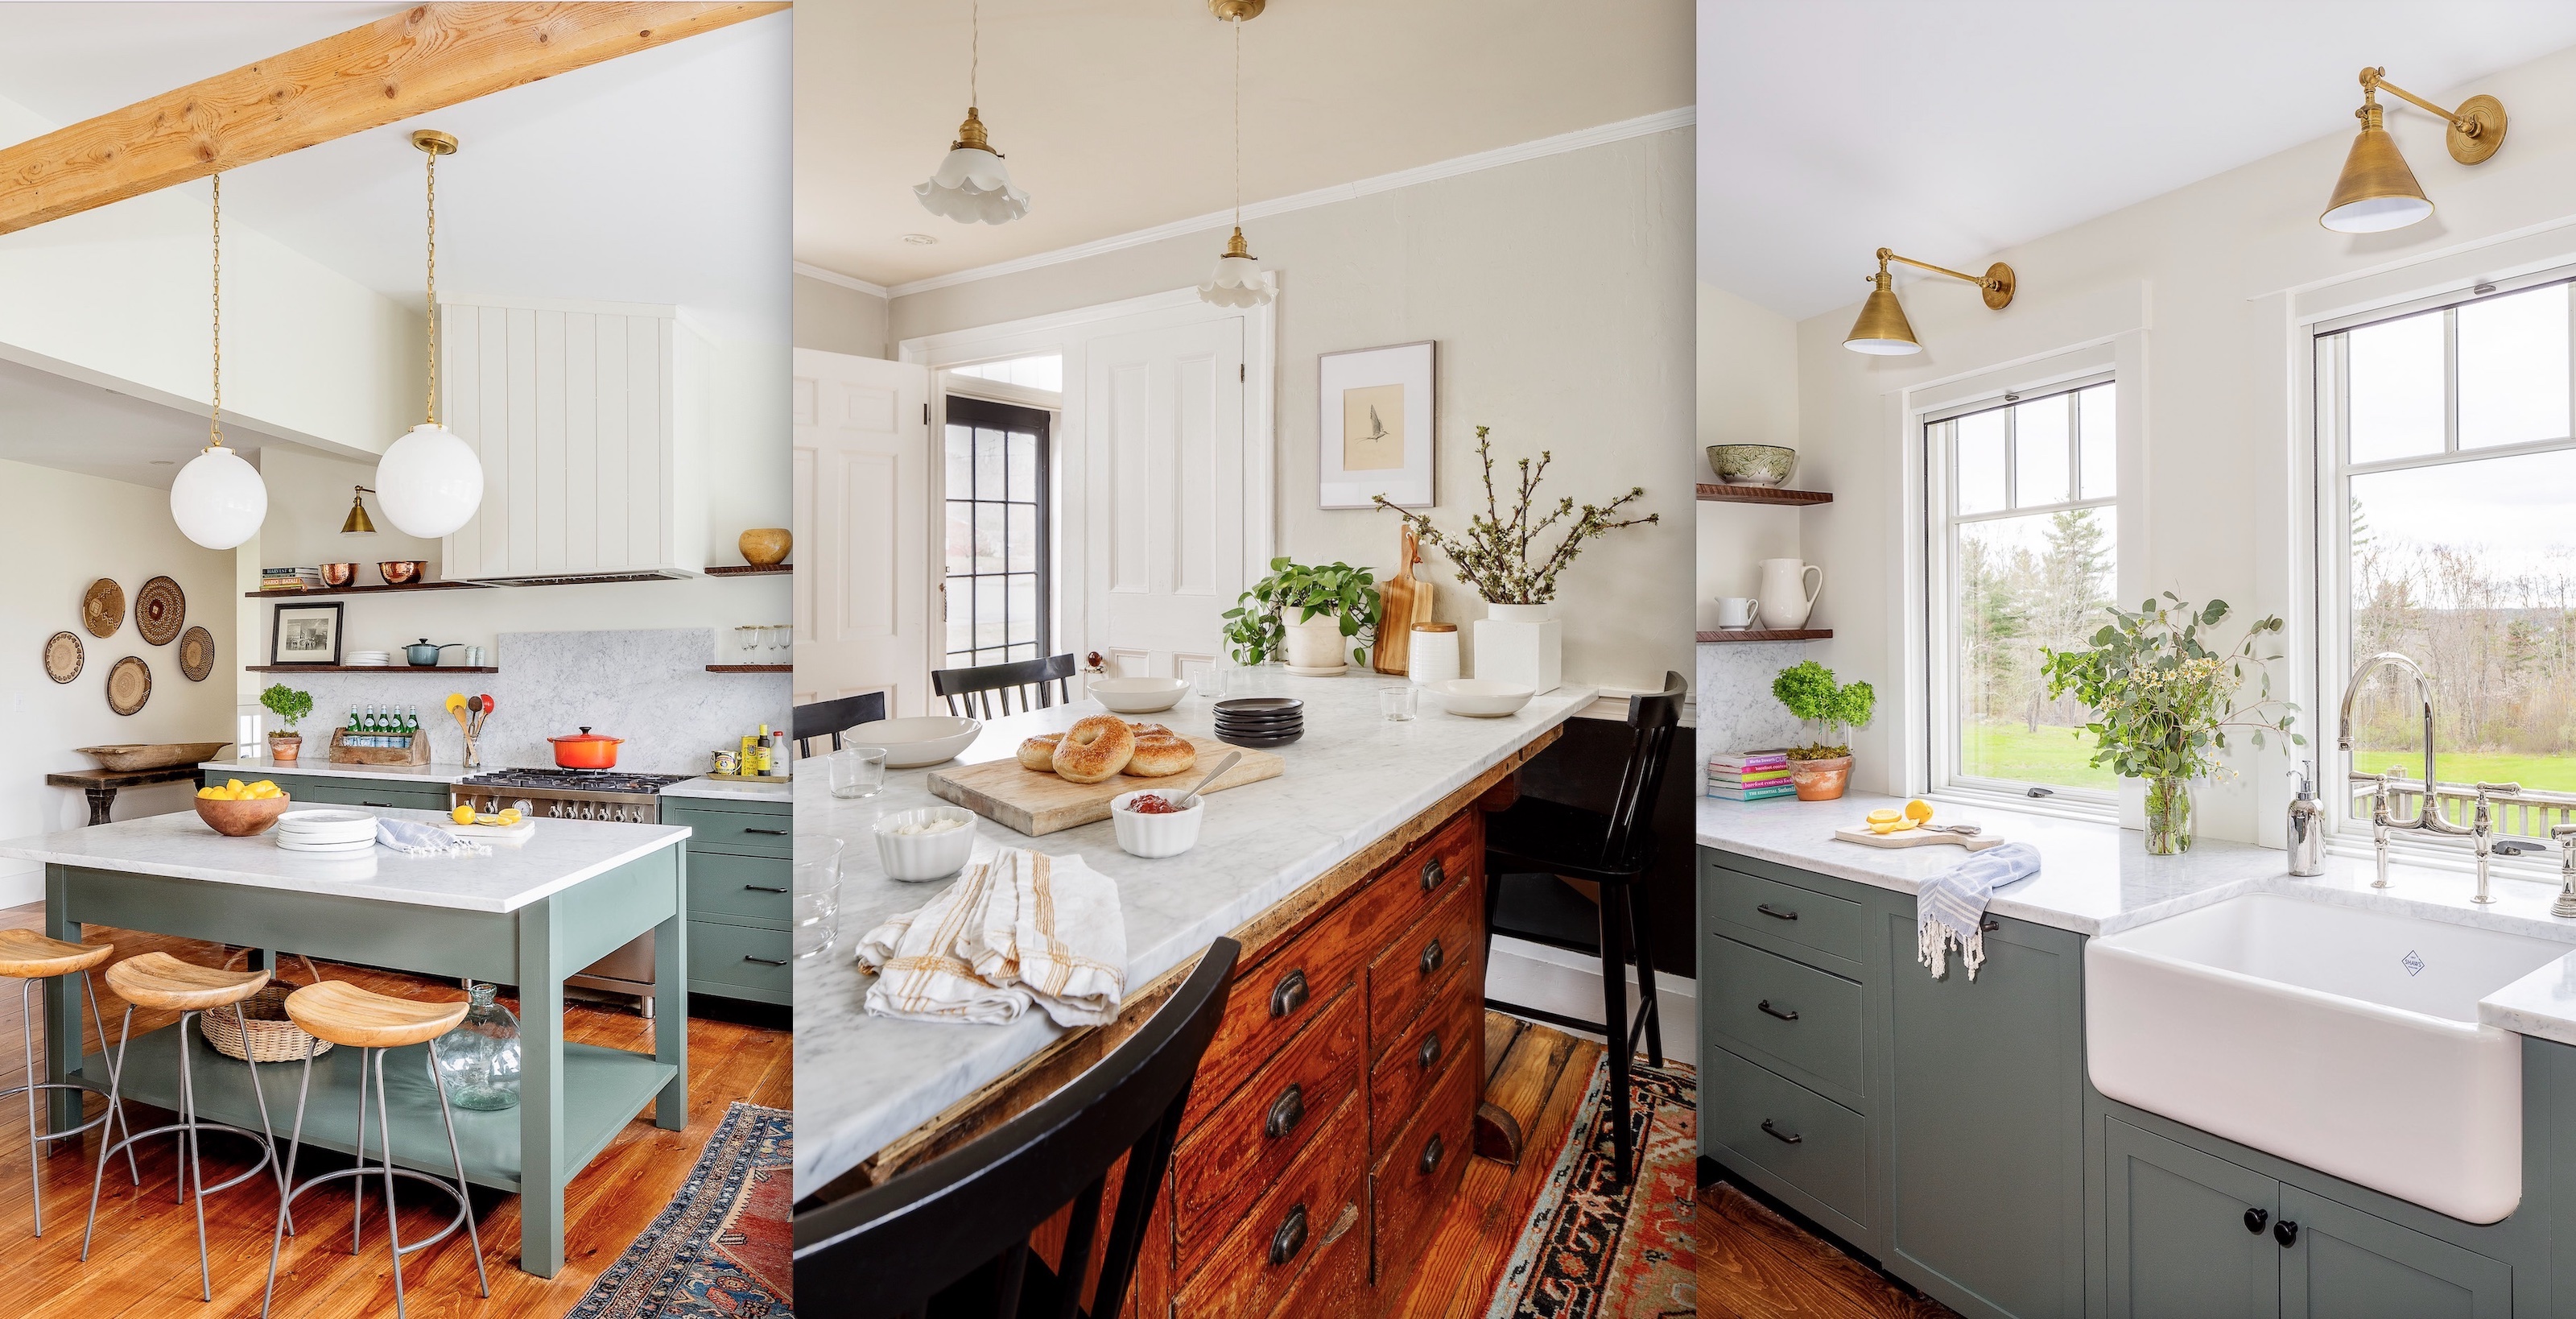 12 Country Kitchen Ideas - How to Give a Rustic Style to Your Kitchen